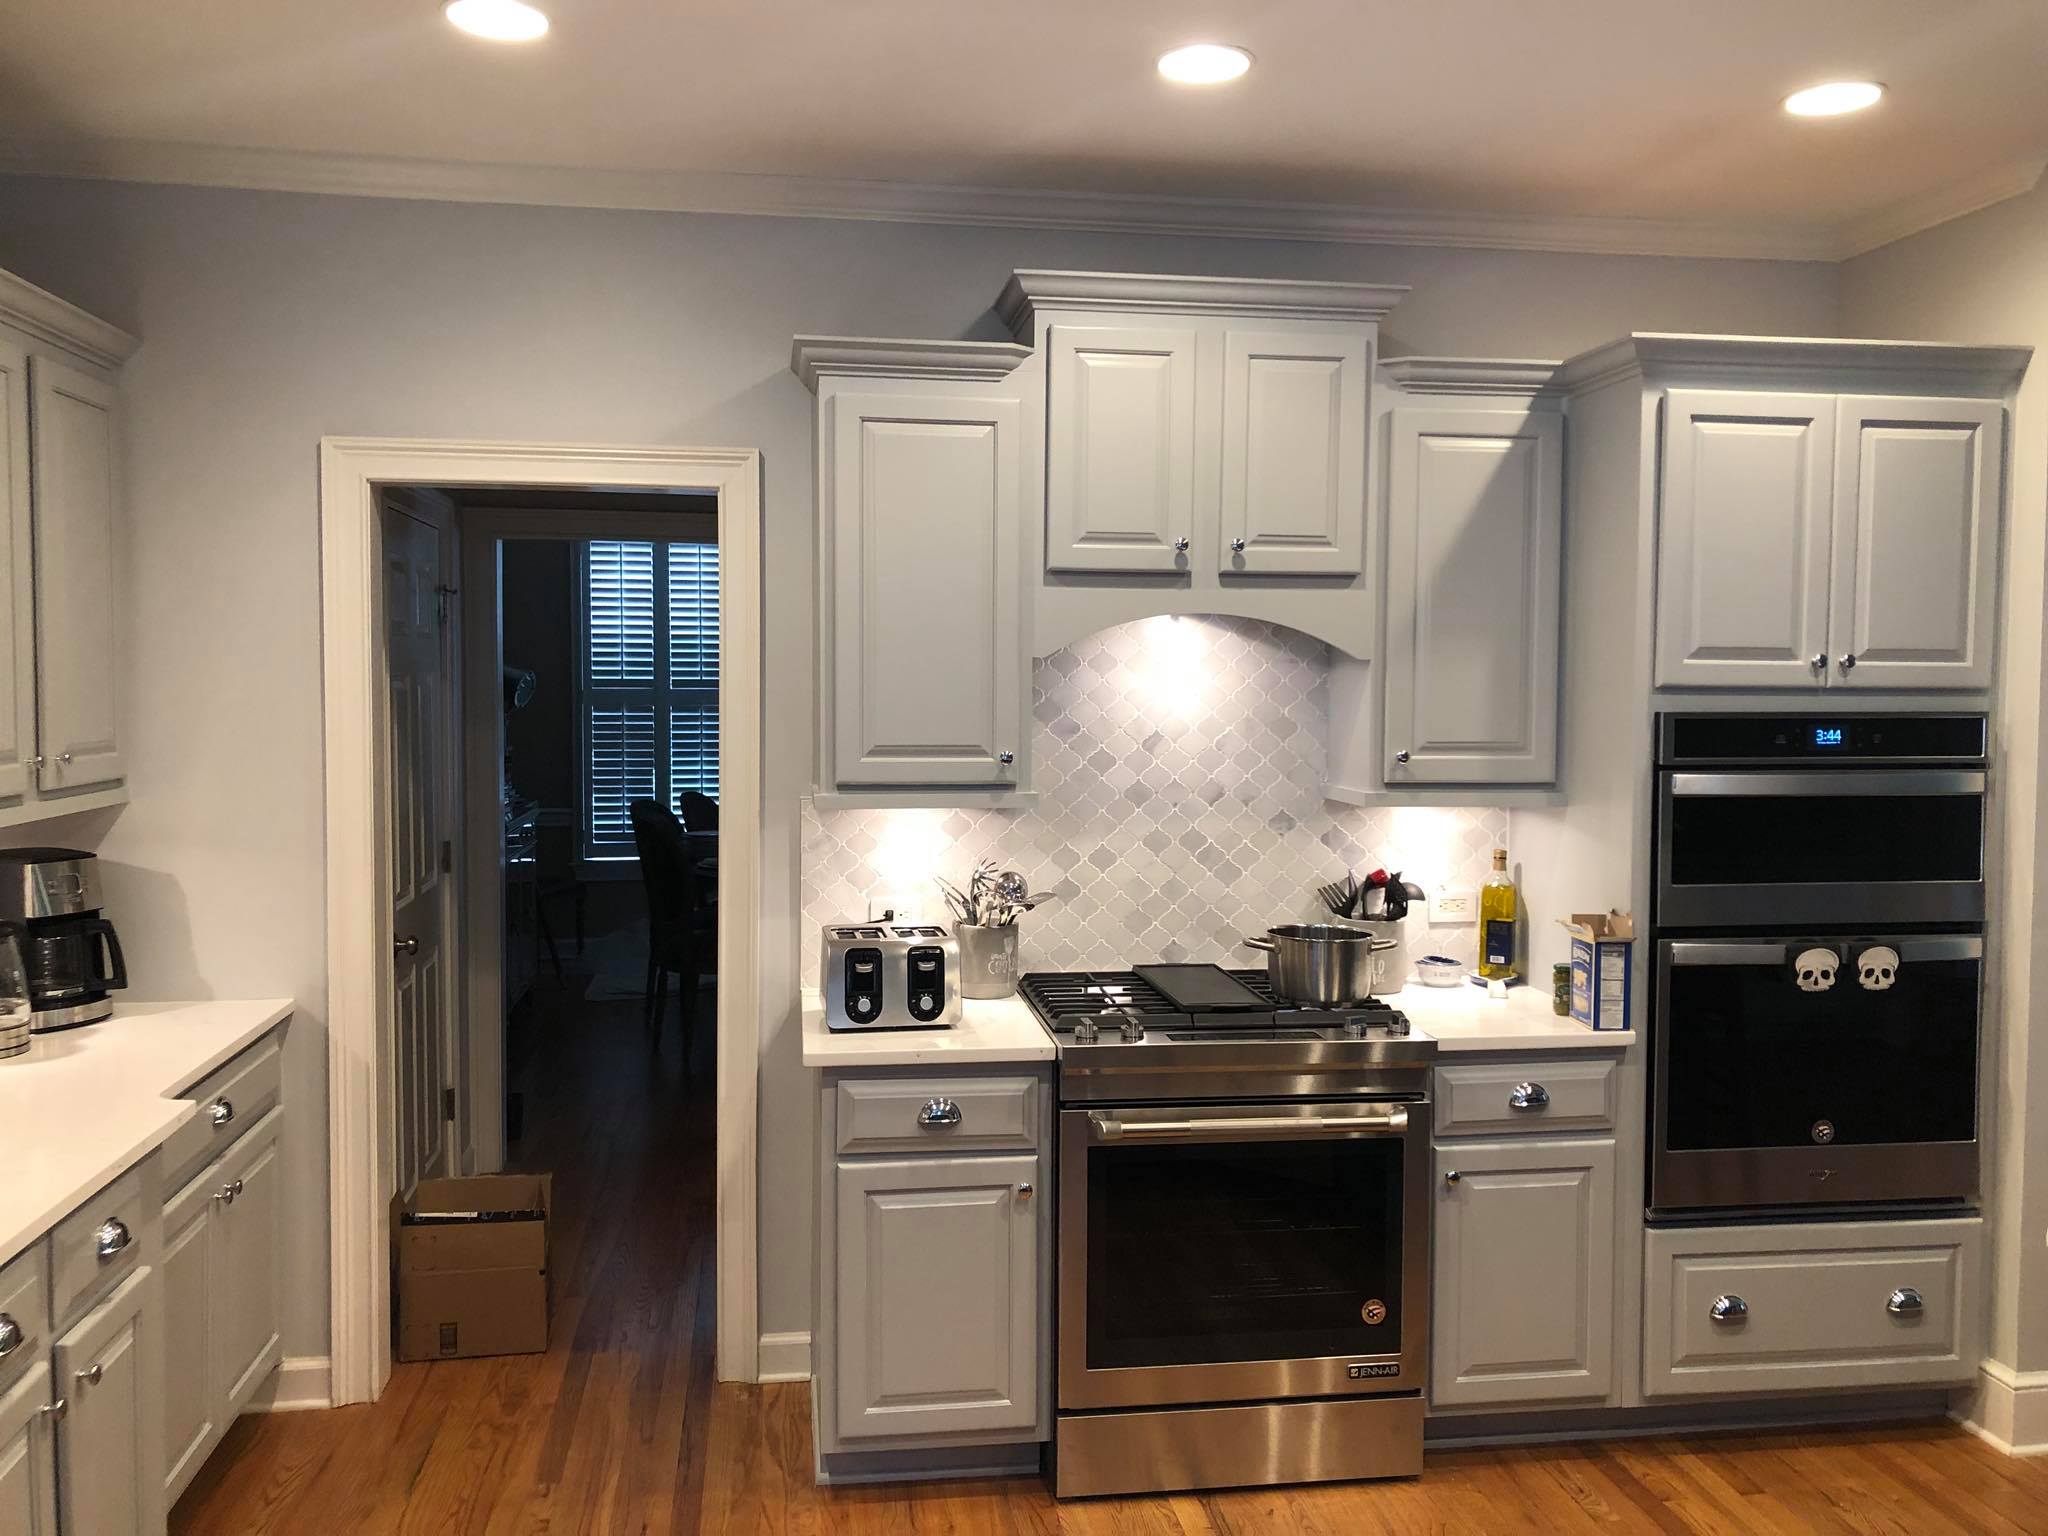 Full Kitchen Remodeling with Upper and Lower Cabinets Painted White Left View